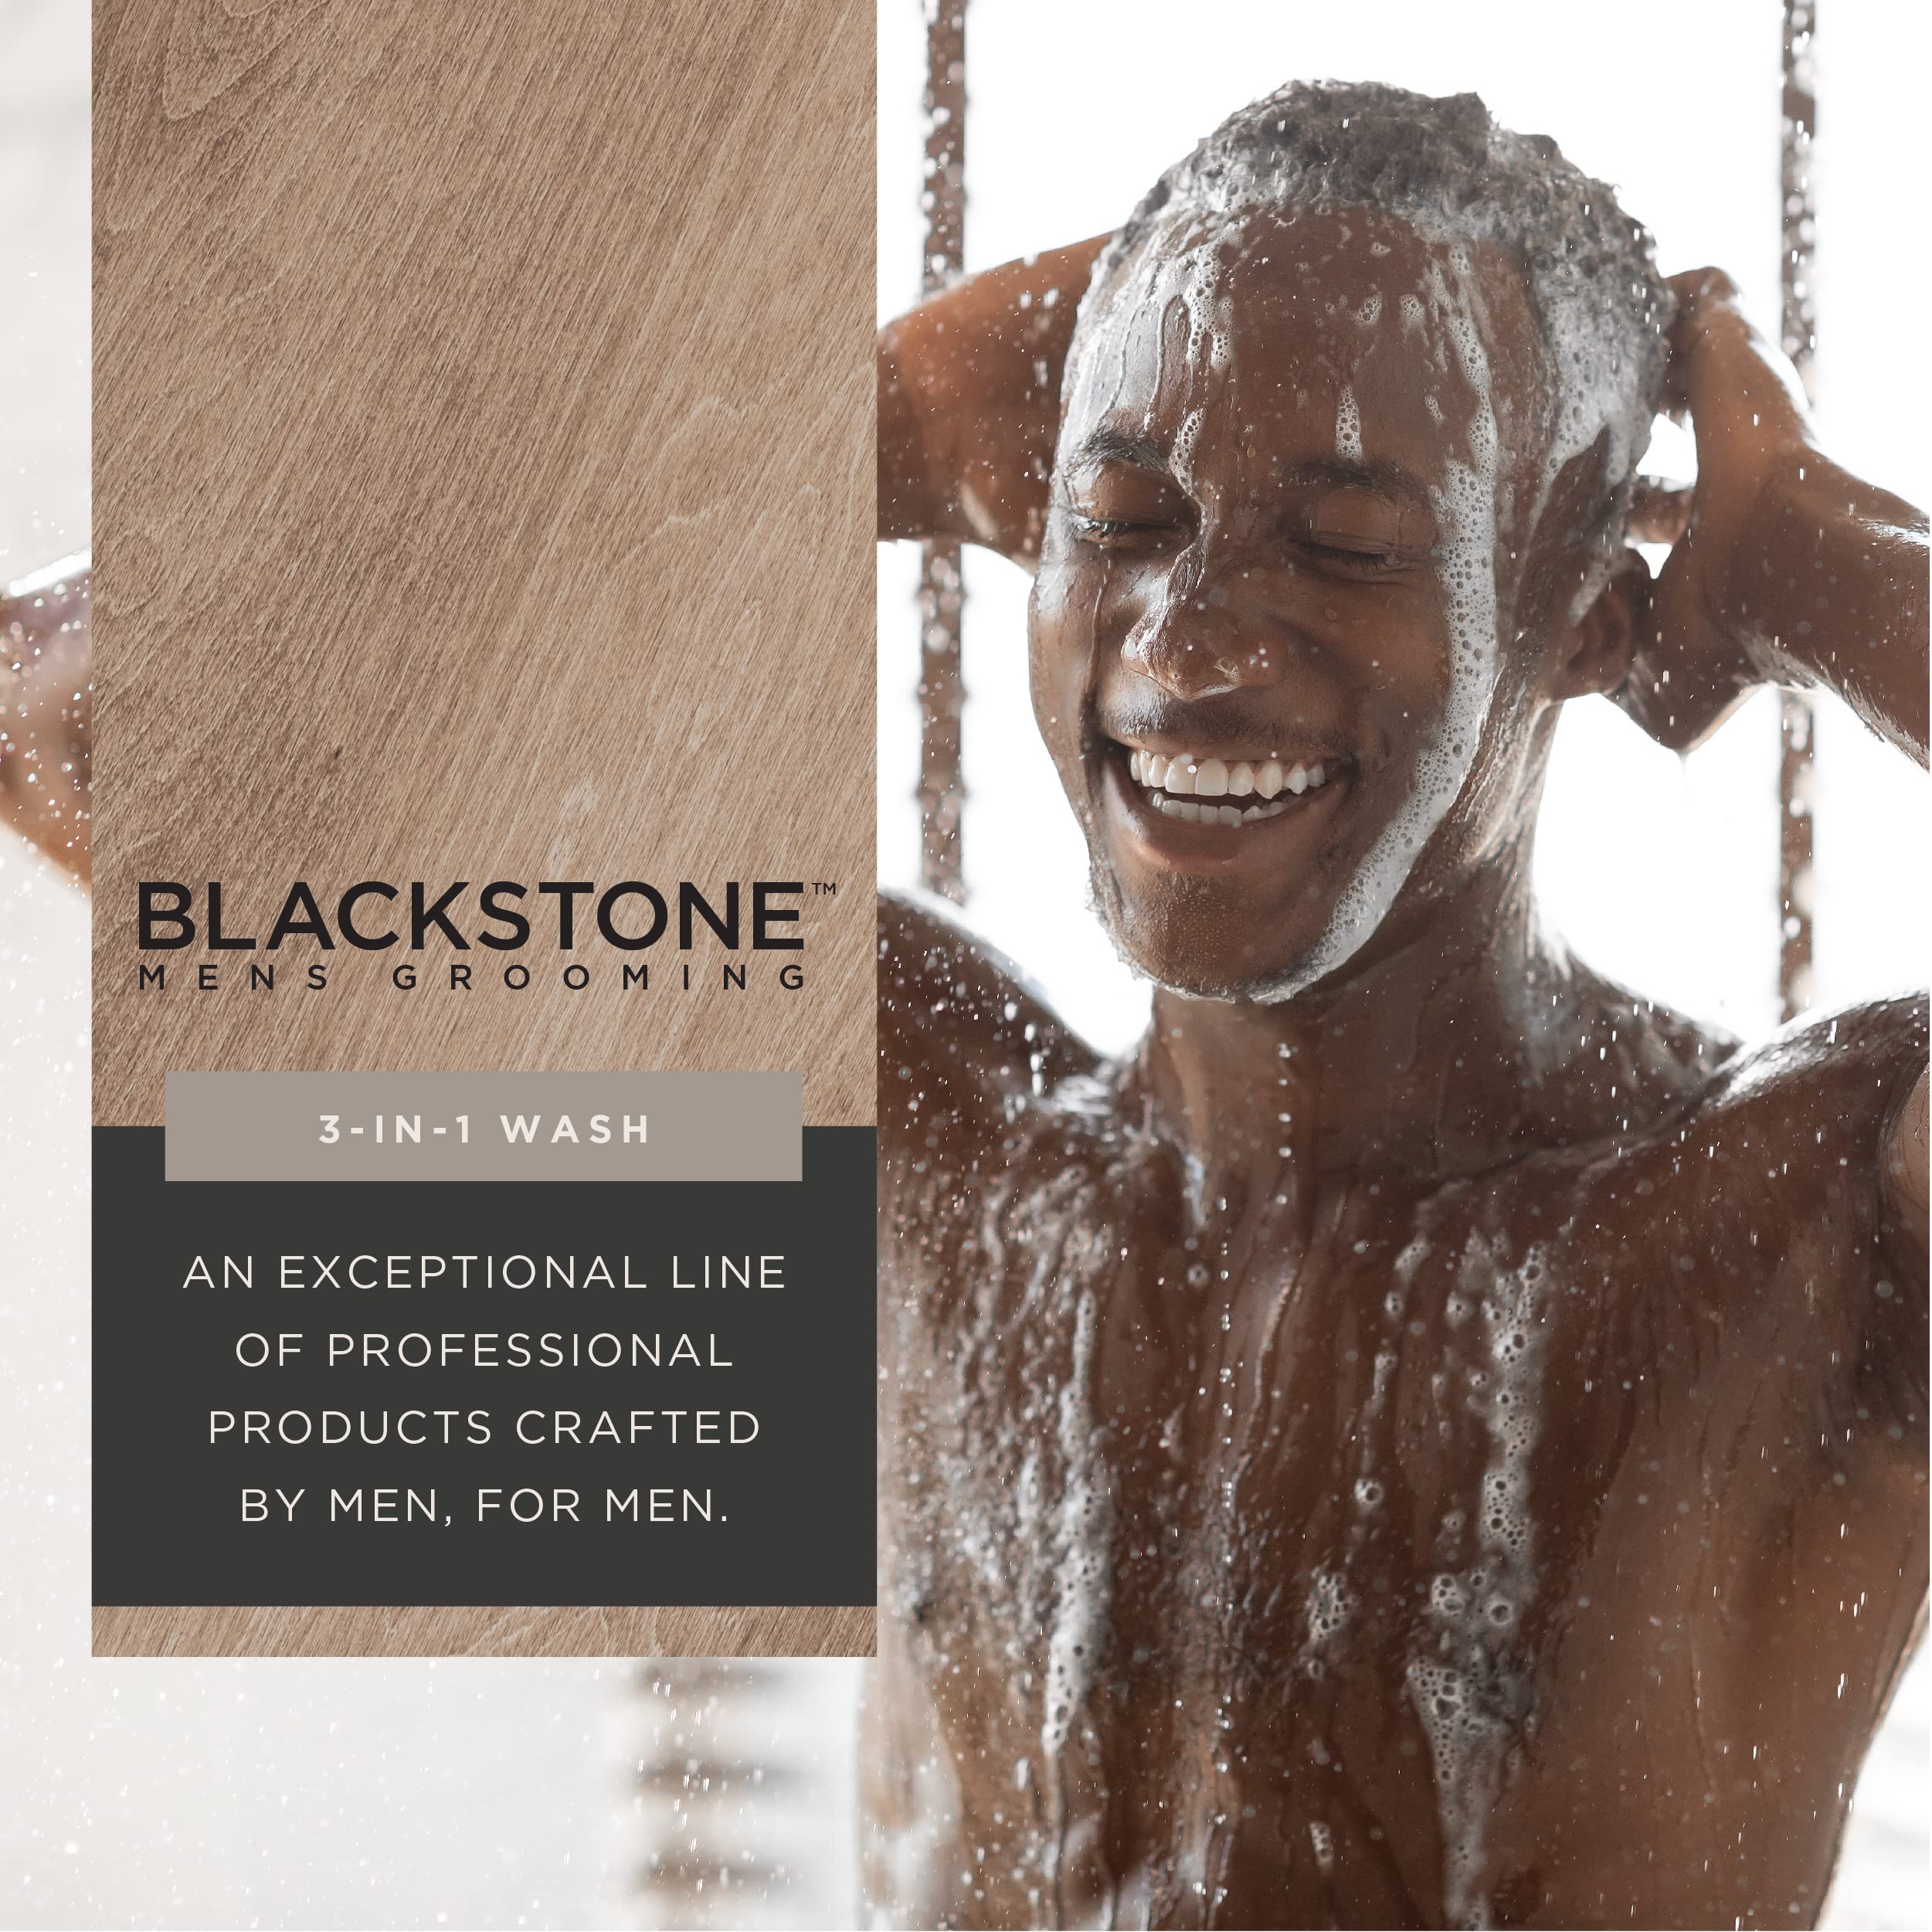 Blackstone 3-in-1 Wash for Men - Cleanses & Conditions Hair, Body, & Face | Mens Body Wash For All Skin & Hair Types | With Coconut Oil & Vitamin B5 - Sandalwood, 35 fl oz